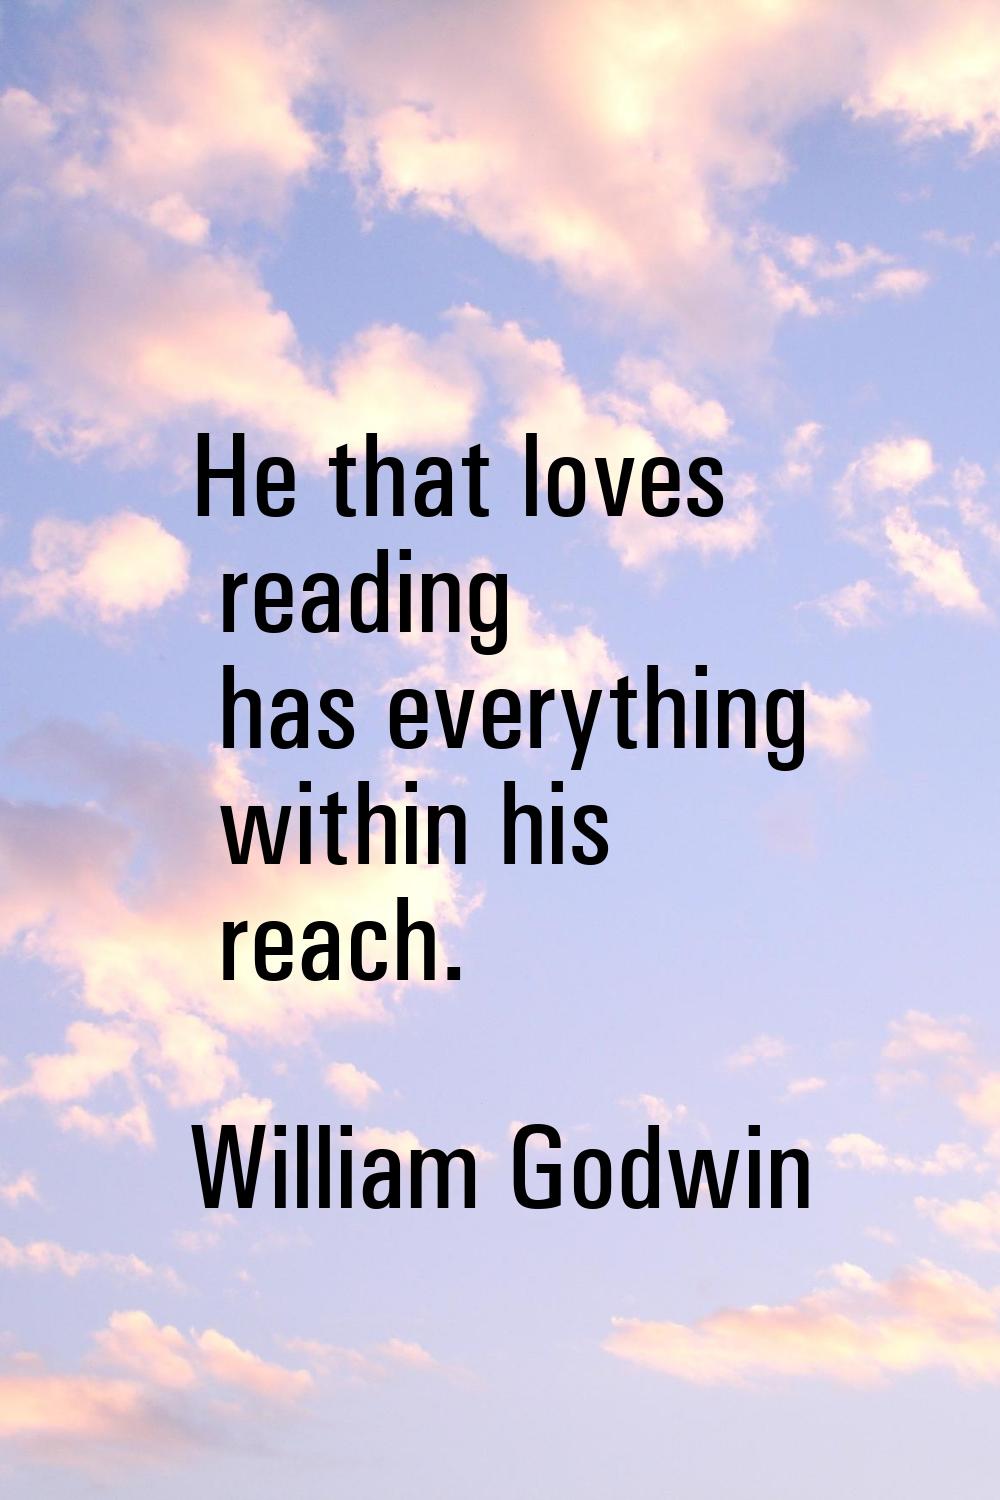 He that loves reading has everything within his reach.